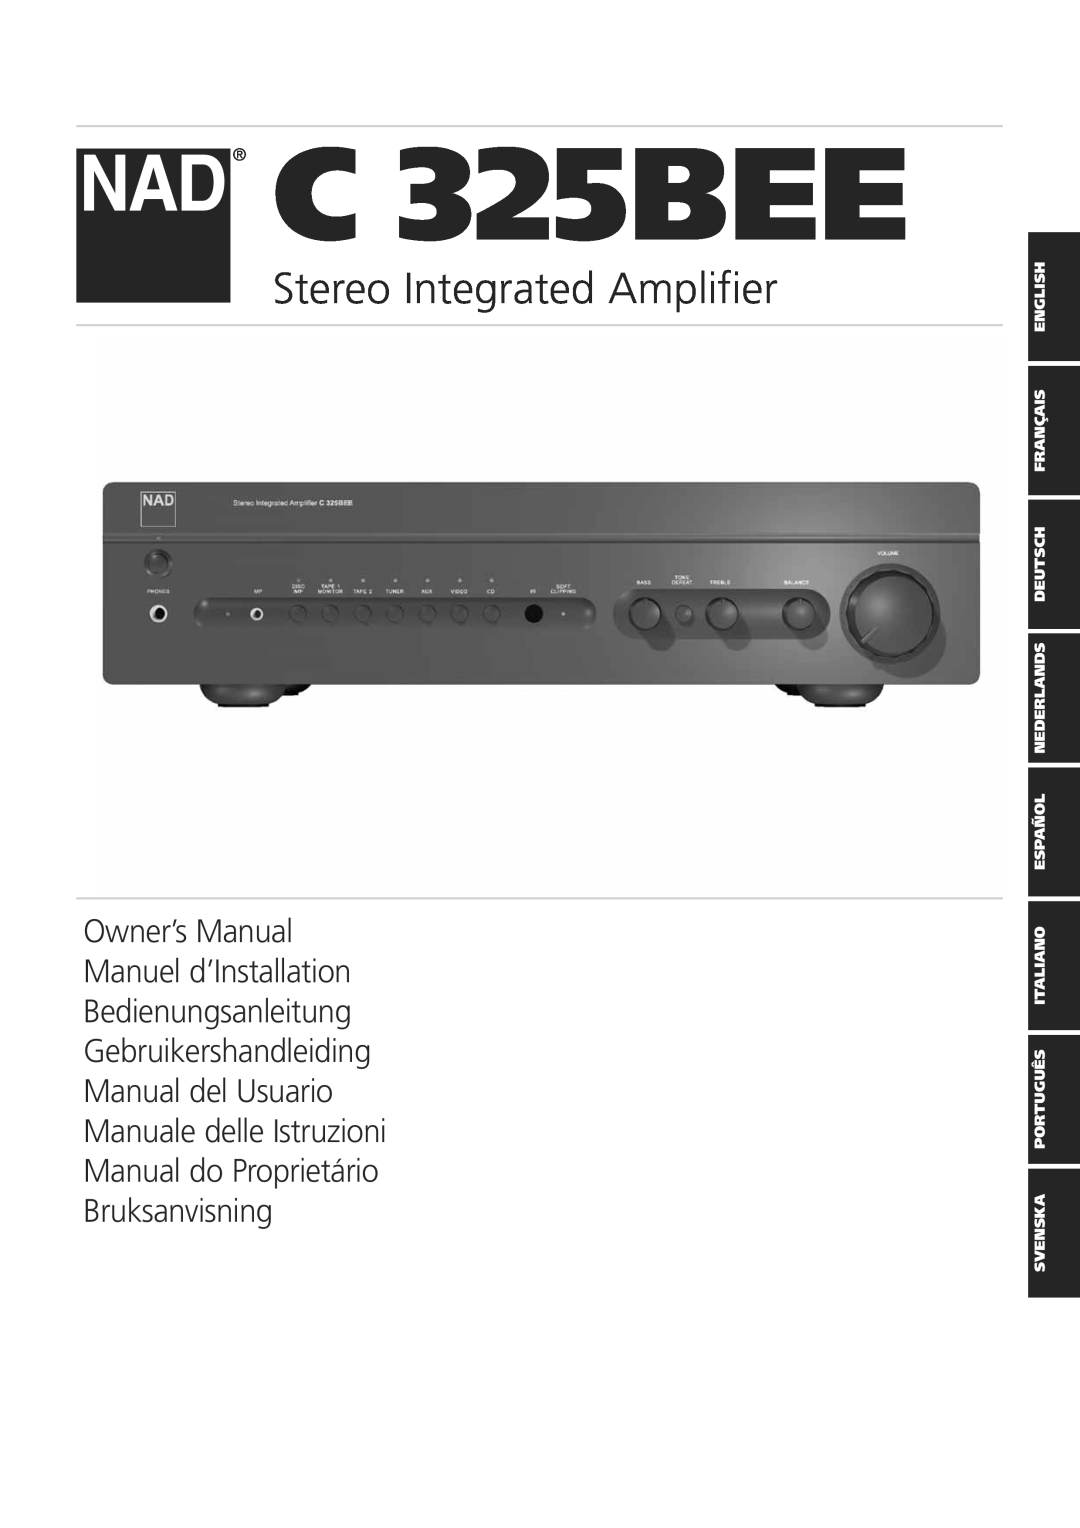 NAD C 325BEE owner manual Stereo Integrated Amplifier, Owner’s Manual Manuel d’Installation 